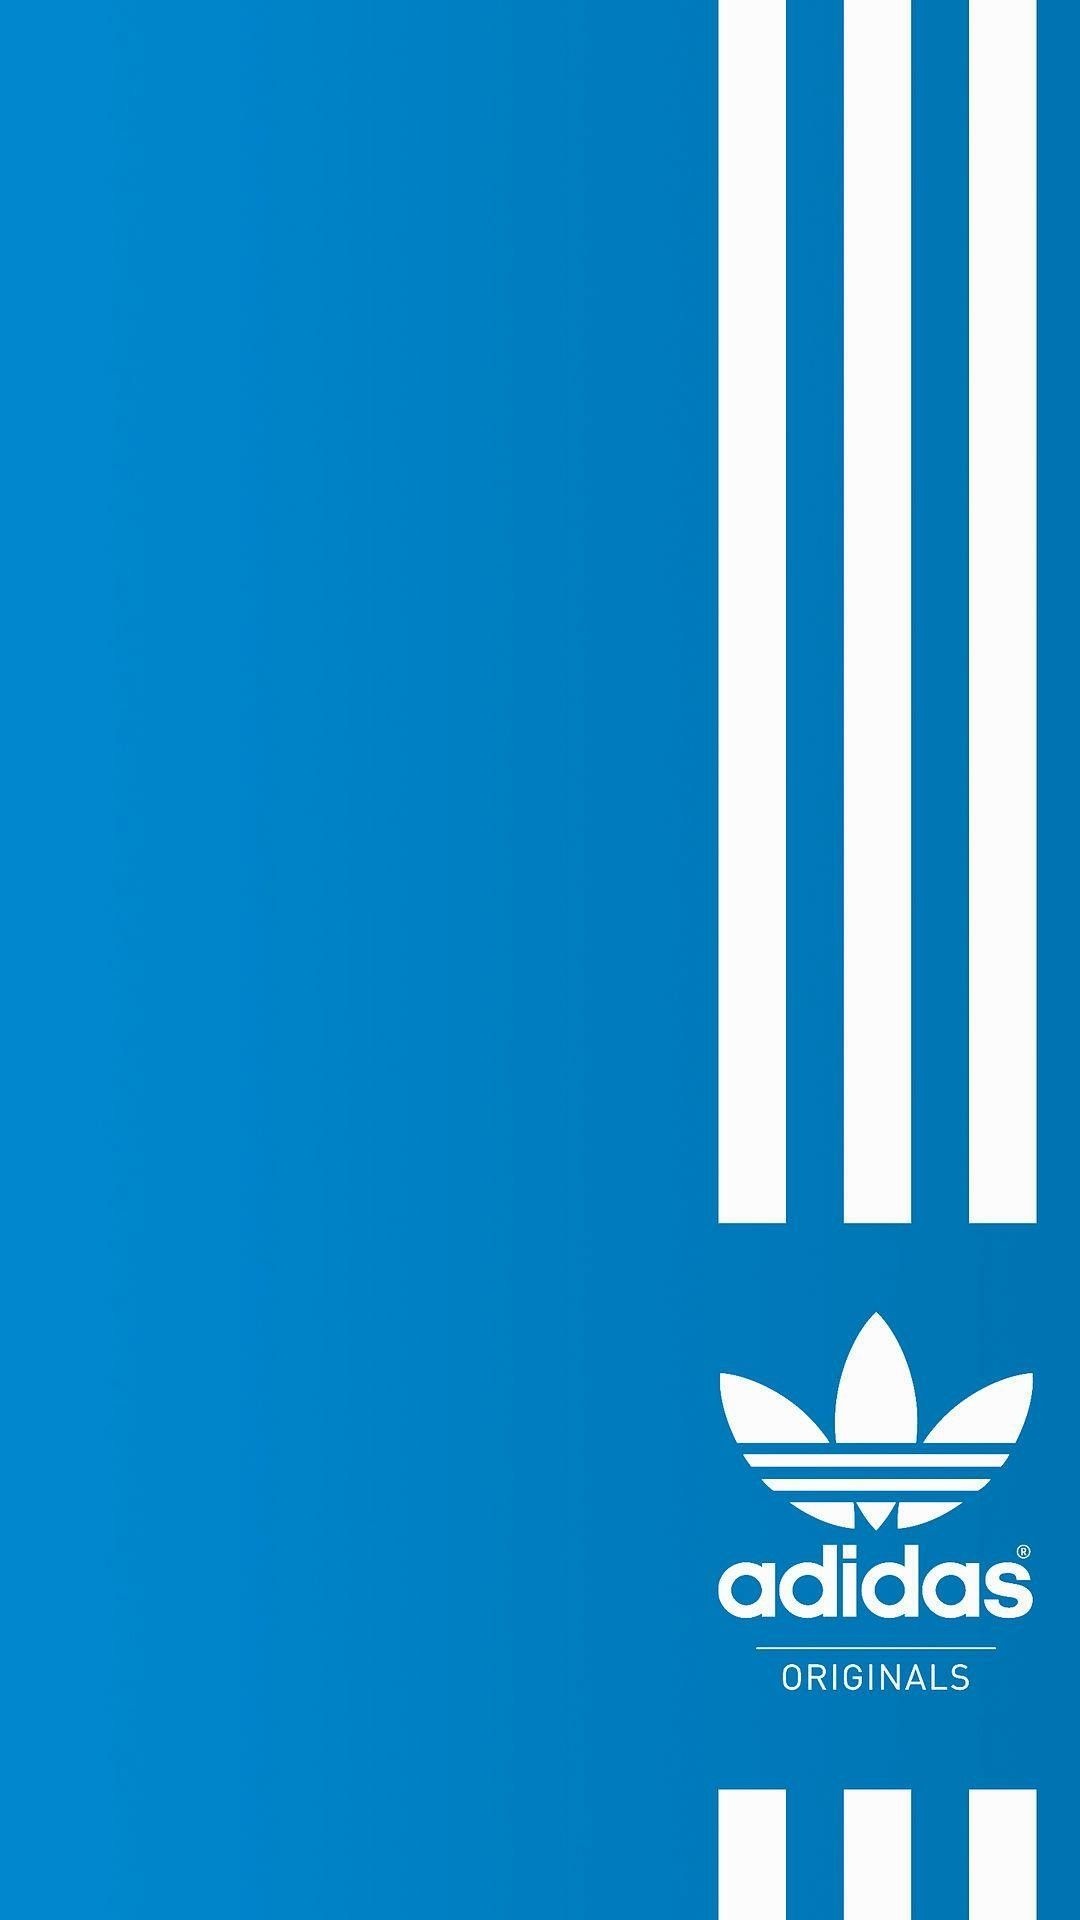 Adidas logo, iPhone wallpapers, Personal style, Fashion inspiration, 1080x1920 Full HD Phone